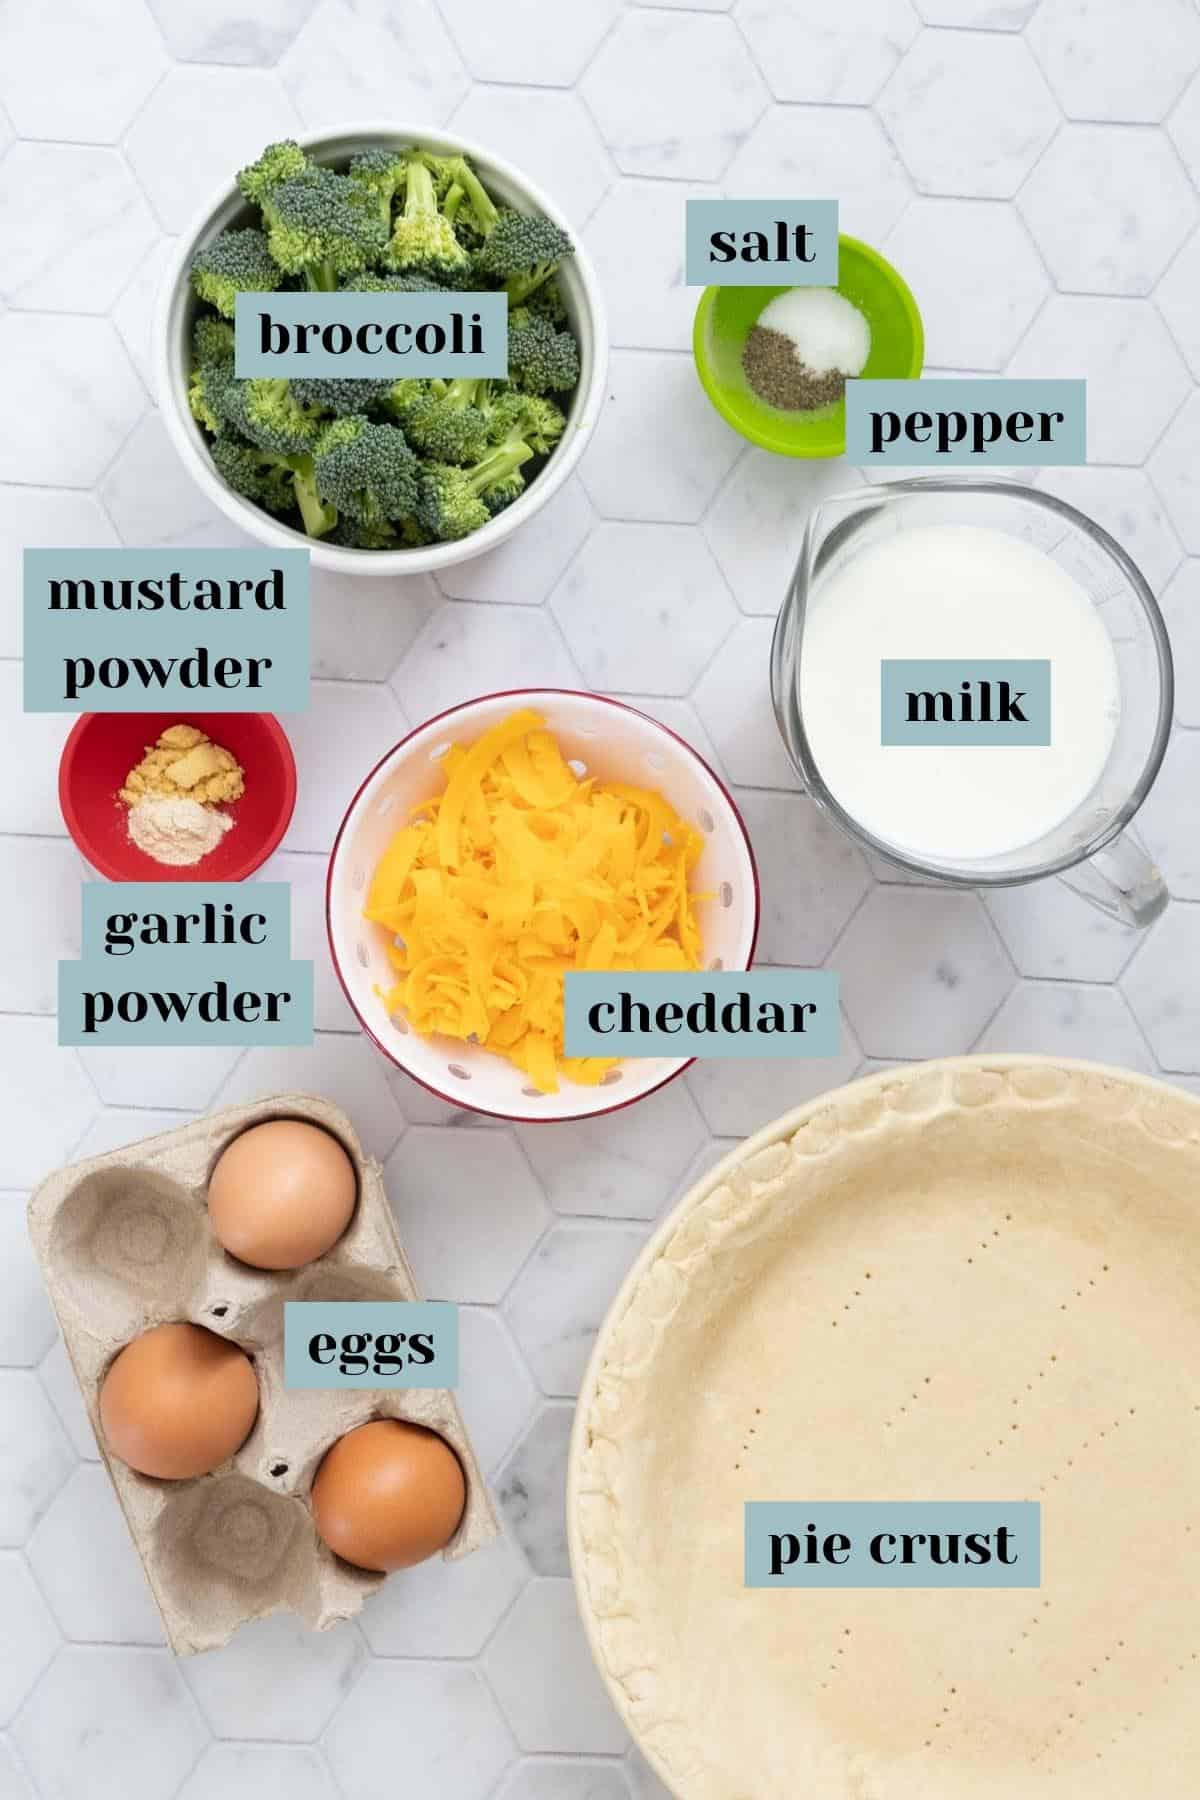 Ingredients for broccoli cheddar quiche on a tile surface with labels.